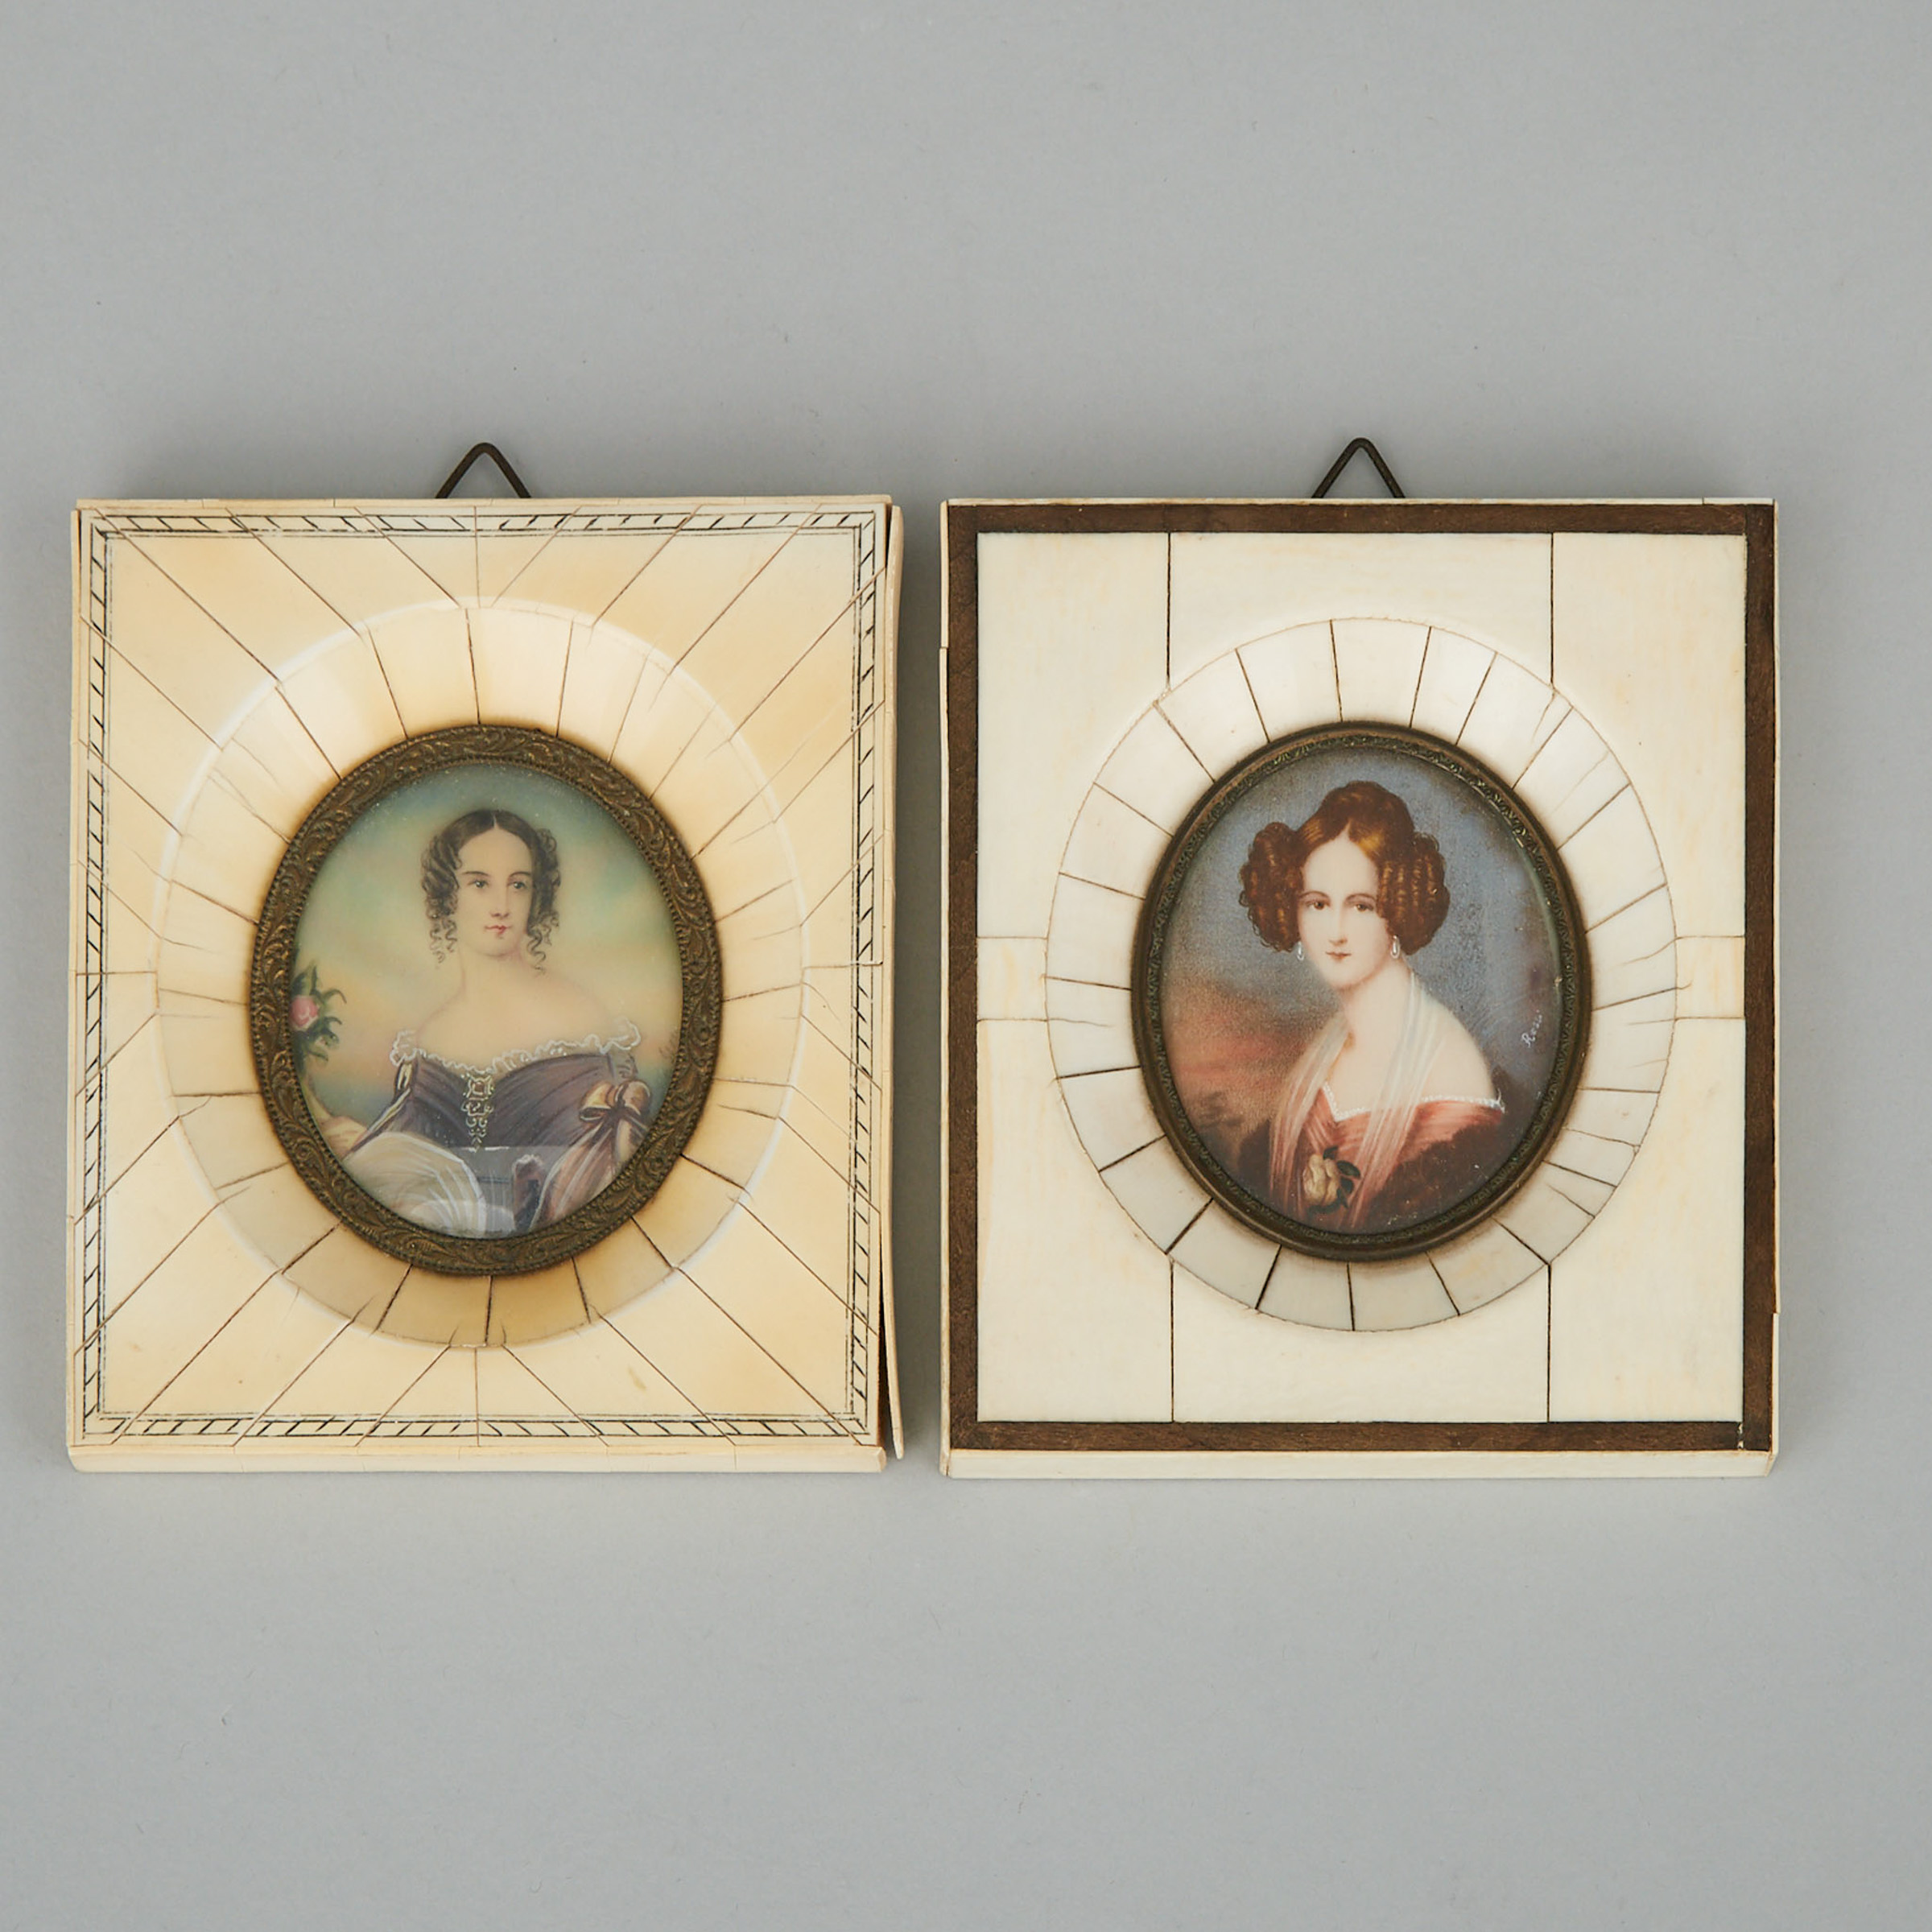 Two Austrian School Portrait Miniatures of Countesses, early 20th century